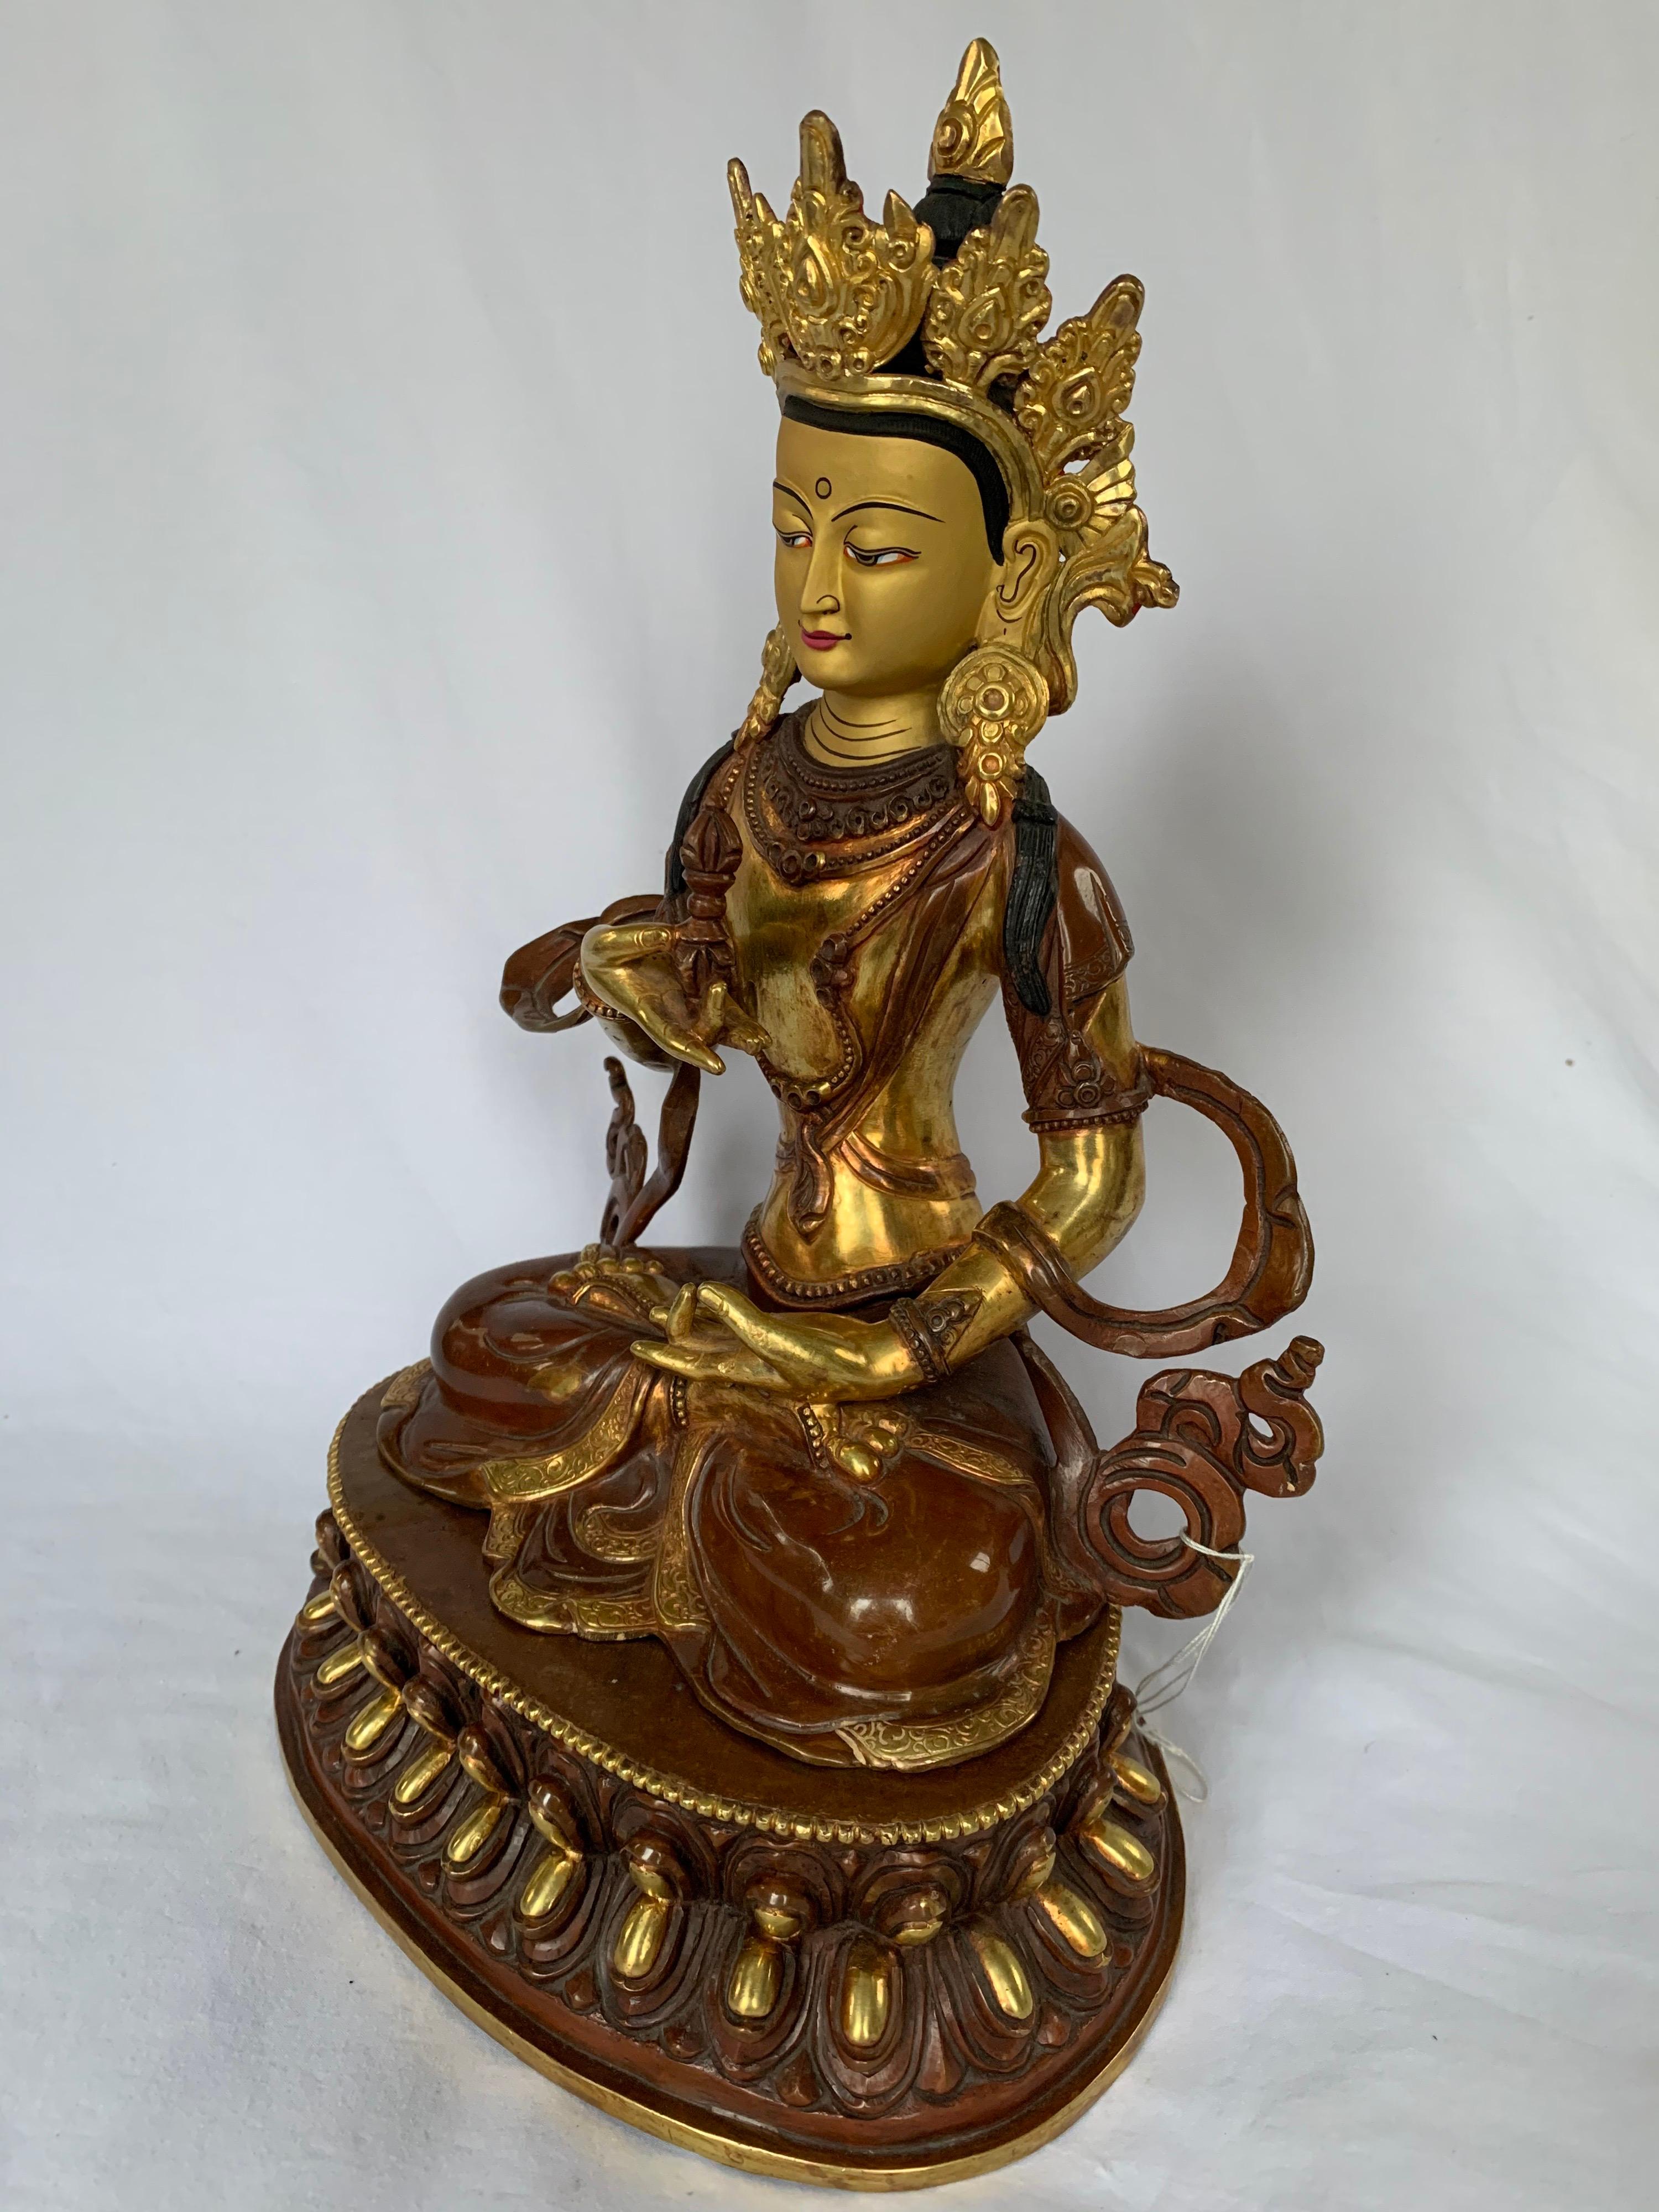 Vajrasattva Statue 12.5 Inch with 24K Gold Handcrafted by Lost Wax Process - Sculpture by Unknown